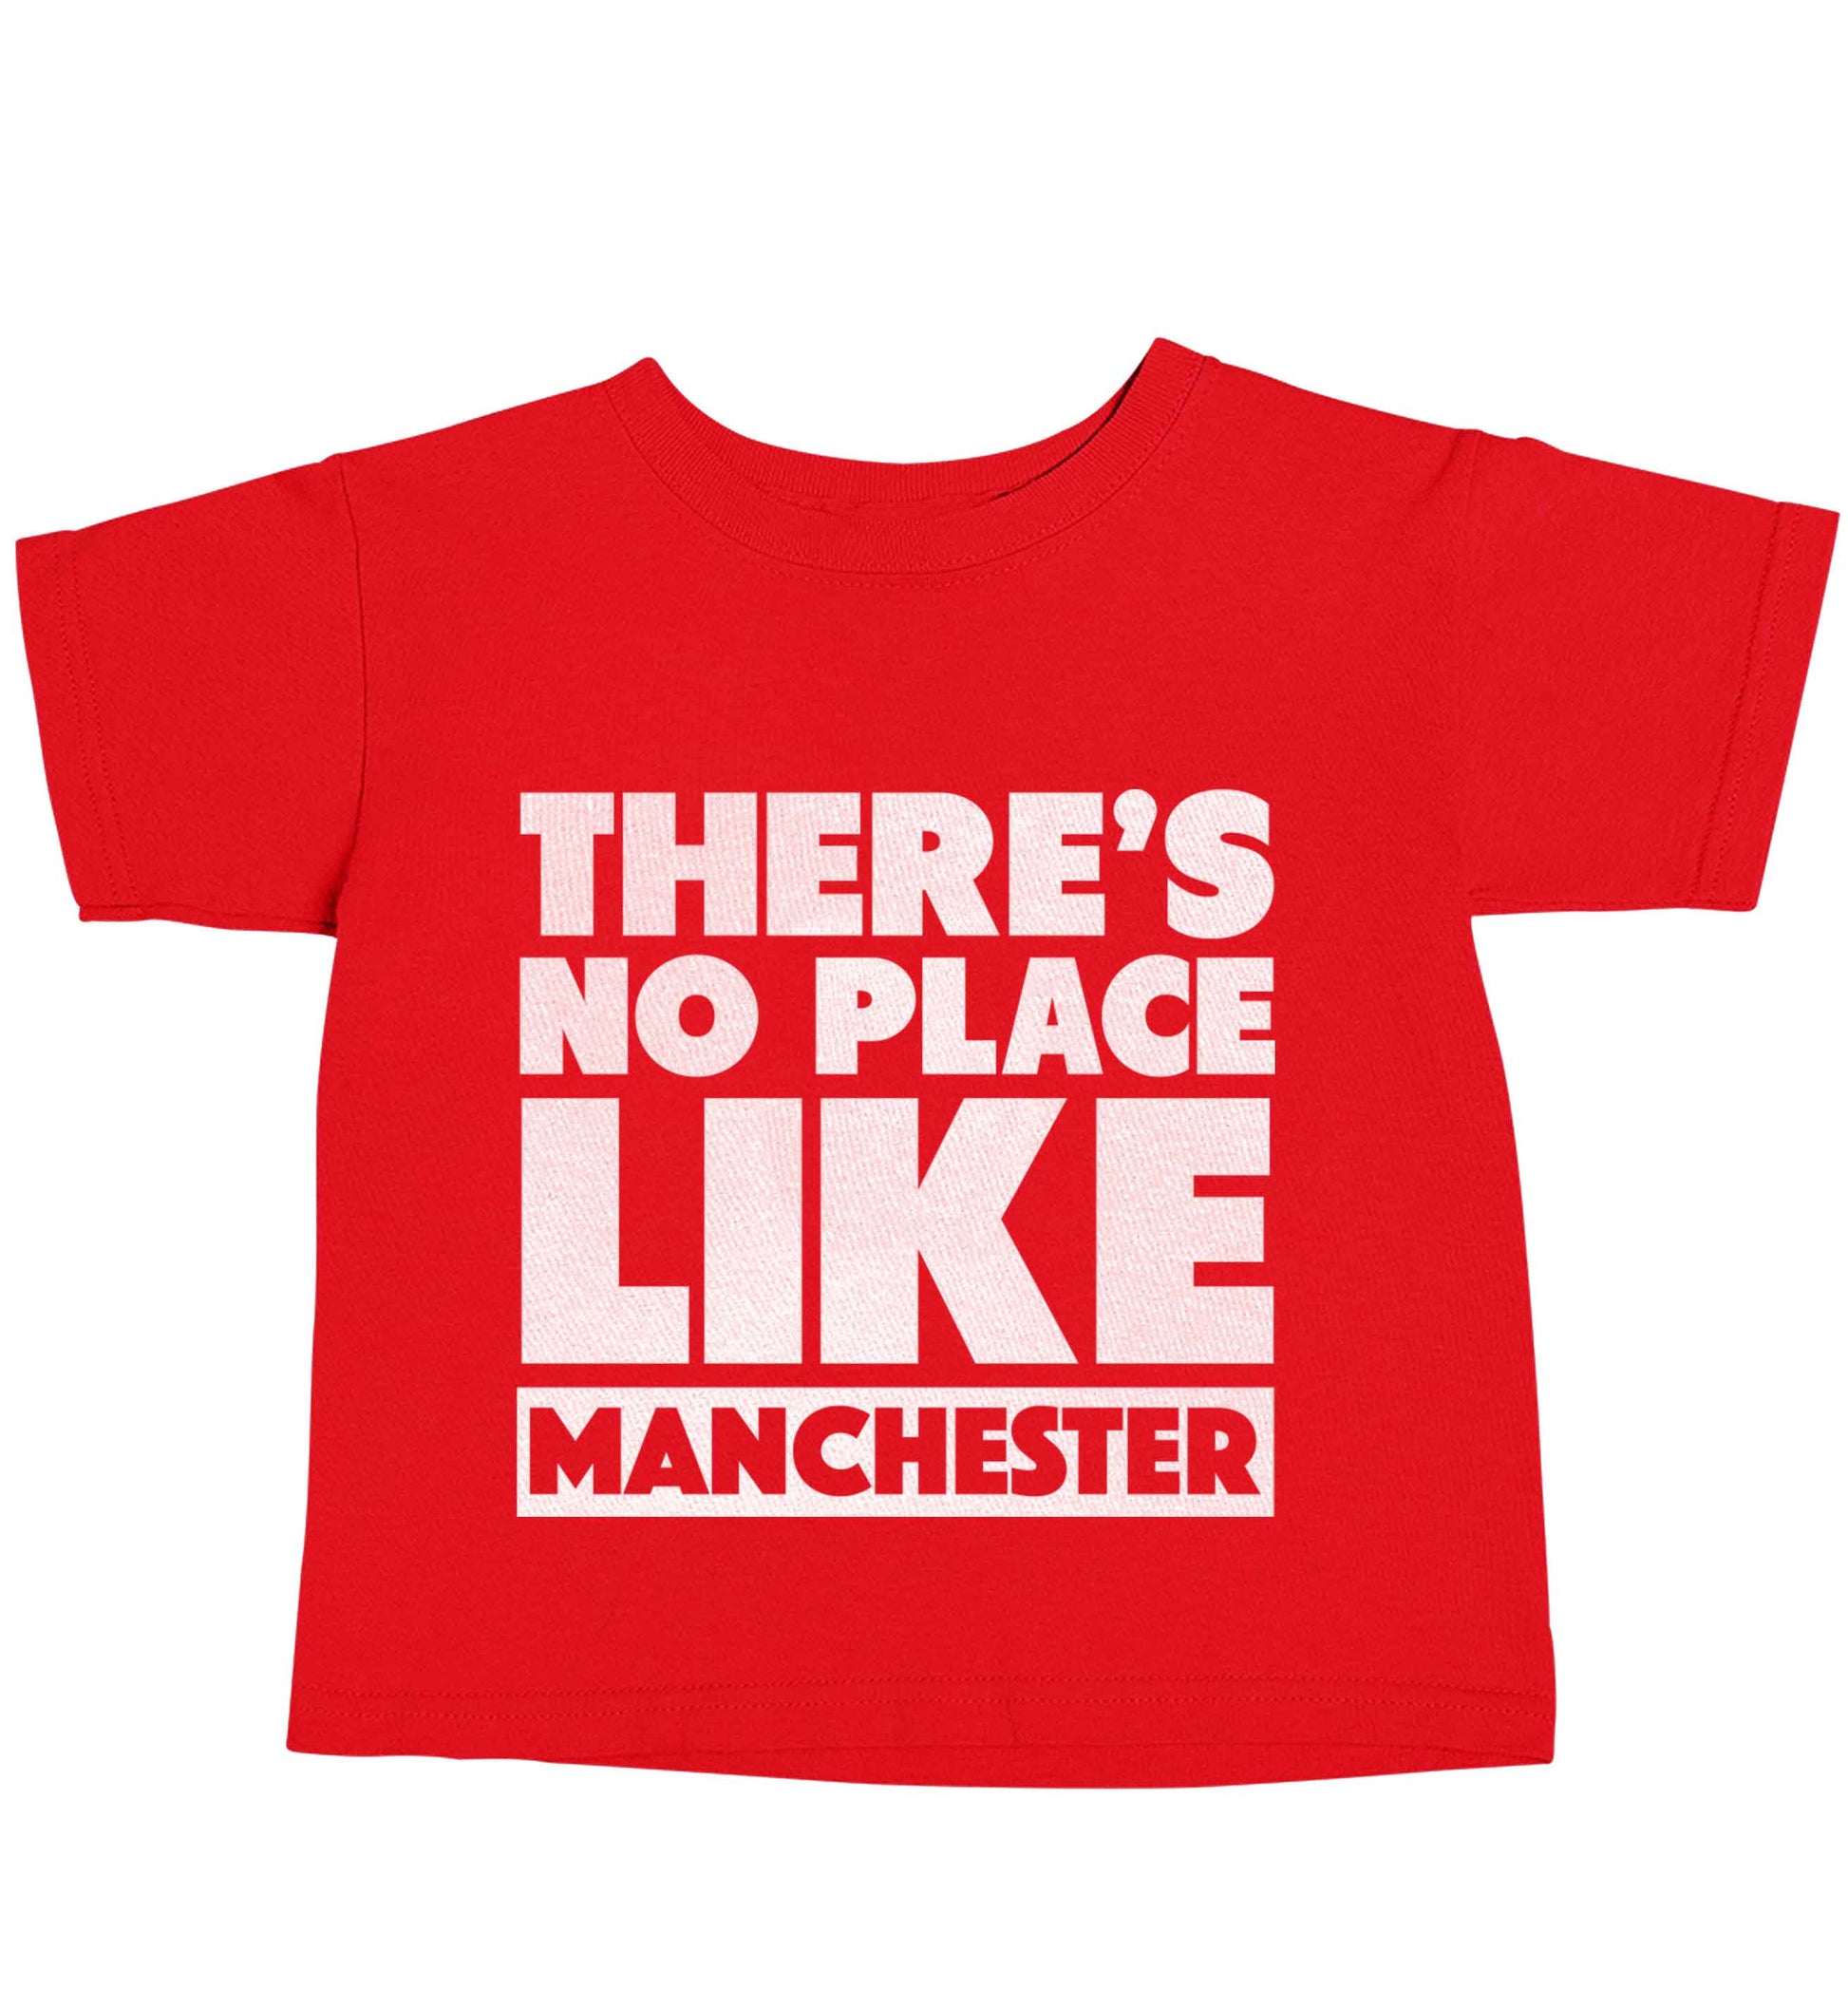 There's no place like Manchester red baby toddler Tshirt 2 Years